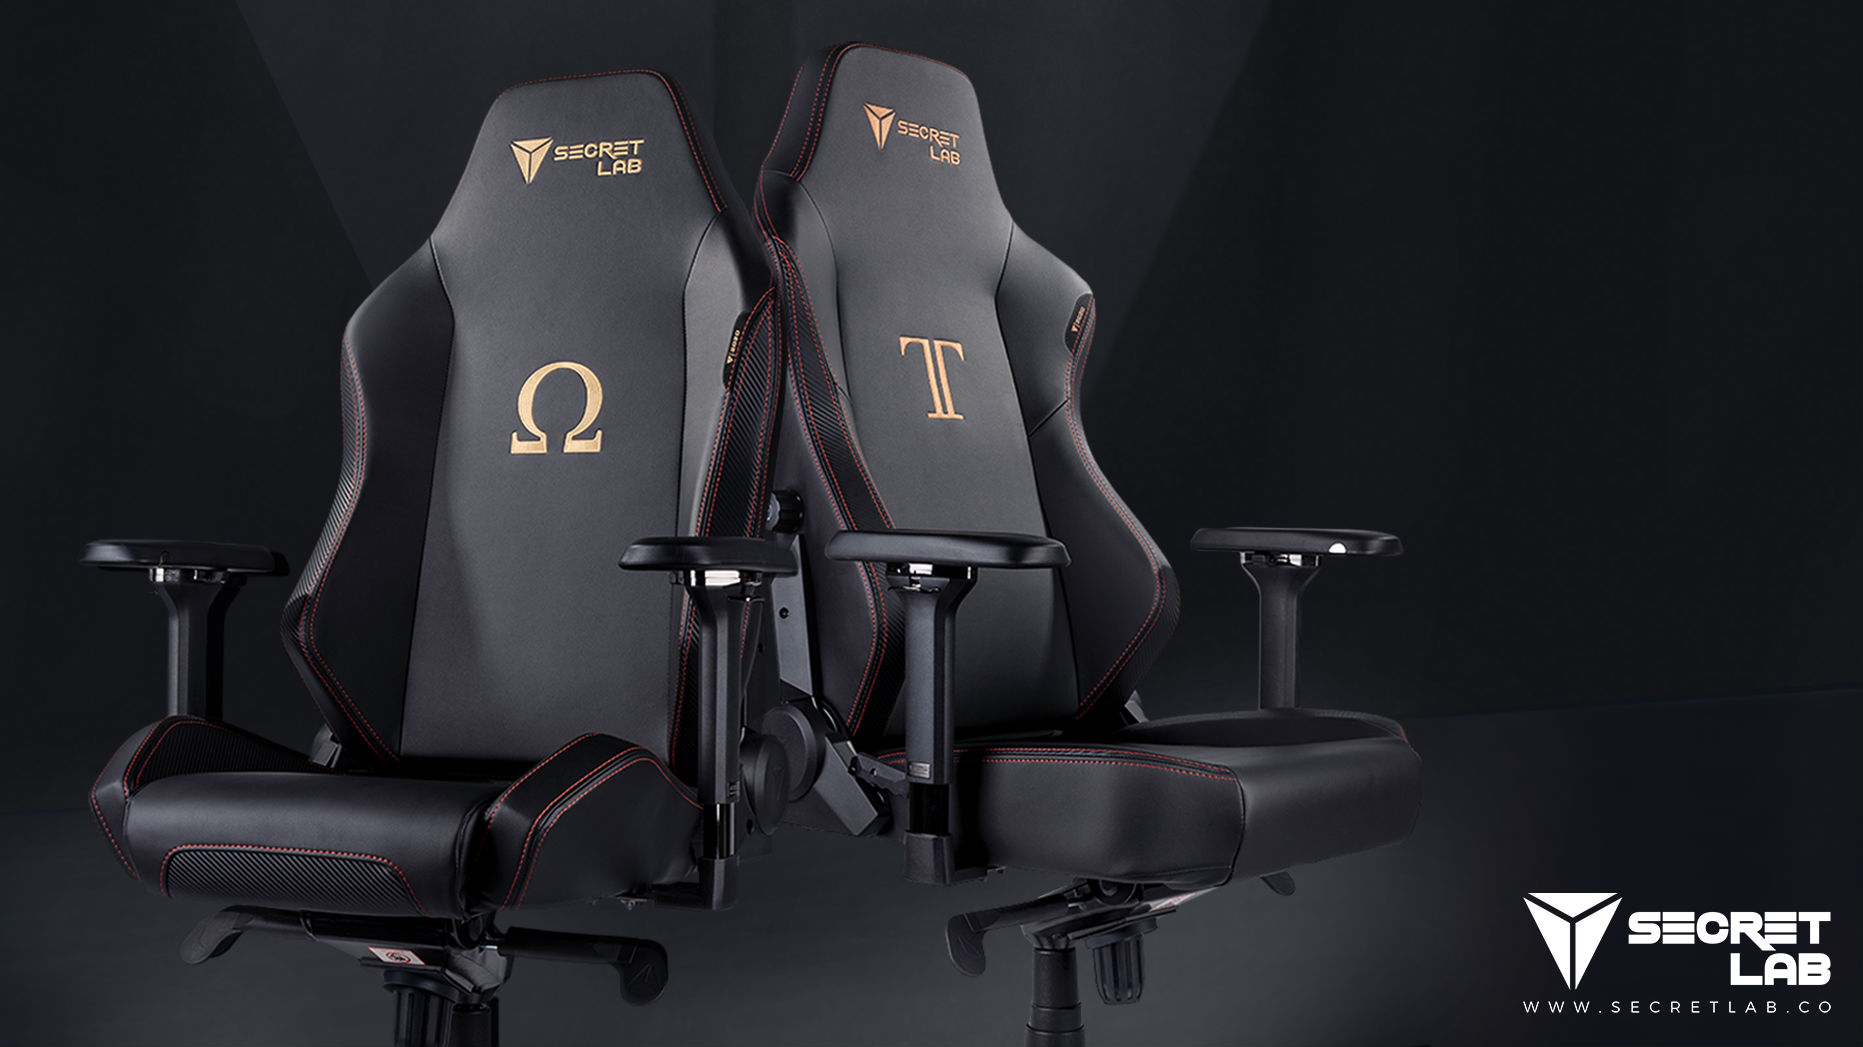 Secretlab Gaming Chairs Now Officially Available In The Philippines